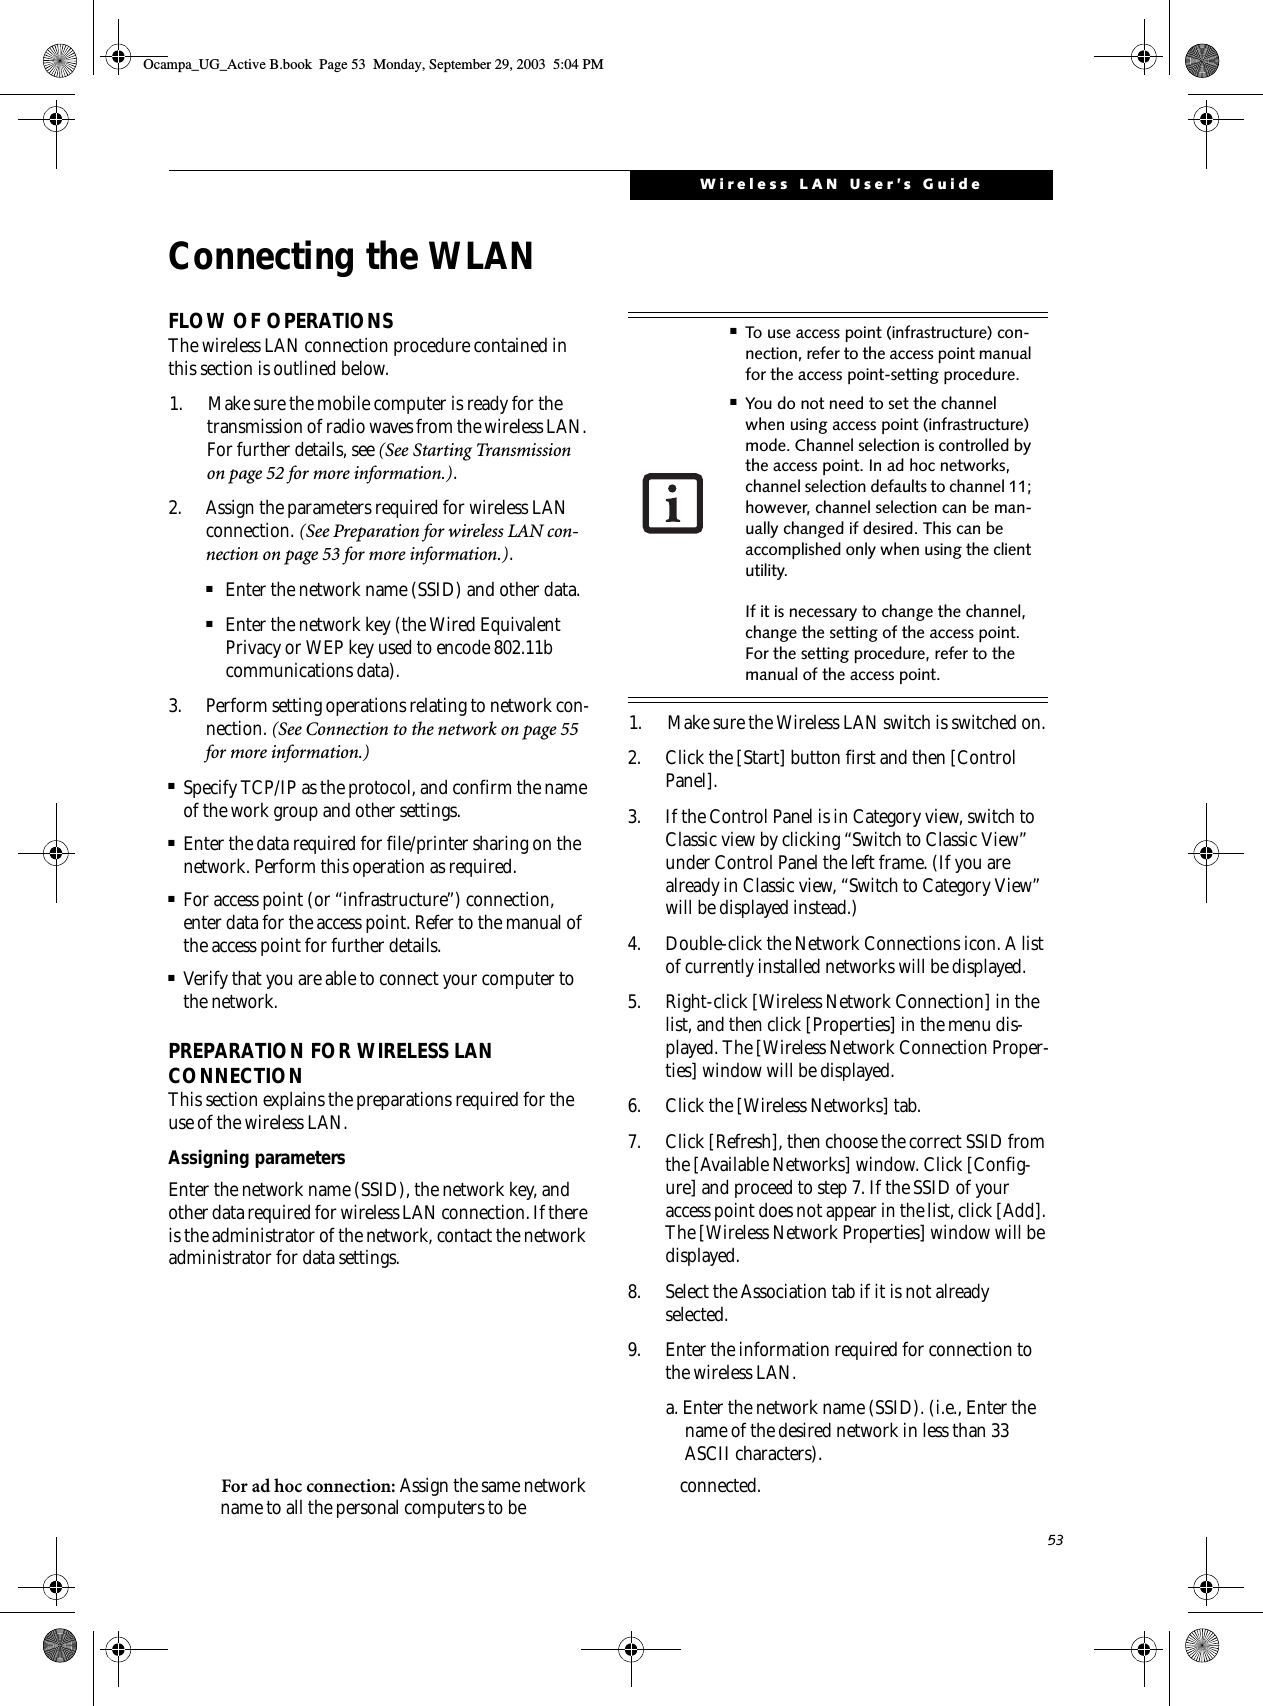 53Wireless LAN User’s GuideConnecting the WLANFLOW OF OPERATIONSThe wireless LAN connection procedure contained in this section is outlined below.1. Make sure the mobile computer is ready for the transmission of radio waves from the wireless LAN. For further details, see (See Starting Transmission on page 52 for more information.).2. Assign the parameters required for wireless LAN connection. (See Preparation for wireless LAN con-nection on page 53 for more information.).■Enter the network name (SSID) and other data.■Enter the network key (the Wired Equivalent Privacy or WEP key used to encode 802.11b communications data).3. Perform setting operations relating to network con-nection. (See Connection to the network on page 55 for more information.)■Specify TCP/IP as the protocol, and confirm the name of the work group and other settings.■Enter the data required for file/printer sharing on the network. Perform this operation as required.■For access point (or “infrastructure”) connection, enter data for the access point. Refer to the manual of the access point for further details.■Verify that you are able to connect your computer to the network.PREPARATION FOR WIRELESS LAN CONNECTIONThis section explains the preparations required for the use of the wireless LAN.Assigning parametersEnter the network name (SSID), the network key, and other data required for wireless LAN connection. If there is the administrator of the network, contact the network administrator for data settings.1. Make sure the Wireless LAN switch is switched on.2. Click the [Start] button first and then [Control Panel].3. If the Control Panel is in Category view, switch to Classic view by clicking “Switch to Classic View” under Control Panel the left frame. (If you are already in Classic view, “Switch to Category View” will be displayed instead.) 4. Double-click the Network Connections icon. A list of currently installed networks will be displayed.5. Right-click [Wireless Network Connection] in the list, and then click [Properties] in the menu dis-played. The [Wireless Network Connection Proper-ties] window will be displayed.6. Click the [Wireless Networks] tab.7. Click [Refresh], then choose the correct SSID from the [Available Networks] window. Click [Config-ure] and proceed to step 7. If the SSID of your access point does not appear in the list, click [Add]. The [Wireless Network Properties] window will be displayed.8. Select the Association tab if it is not already selected.9. Enter the information required for connection to the wireless LAN.a. Enter the network name (SSID). (i.e., Enter the name of the desired network in less than 33 ASCII characters).For ad hoc connection: Assign the same network name to all the personal computers to be  connected.■To use access point (infrastructure) con-nection, refer to the access point manual for the access point-setting procedure.■You do not need to set the channel when using access point (infrastructure) mode. Channel selection is controlled by the access point. In ad hoc networks, channel selection defaults to channel 11; however, channel selection can be man-ually changed if desired. This can be accomplished only when using the client utility.If it is necessary to change the channel, change the setting of the access point. For the setting procedure, refer to the manual of the access point.Ocampa_UG_Active B.book  Page 53  Monday, September 29, 2003  5:04 PM